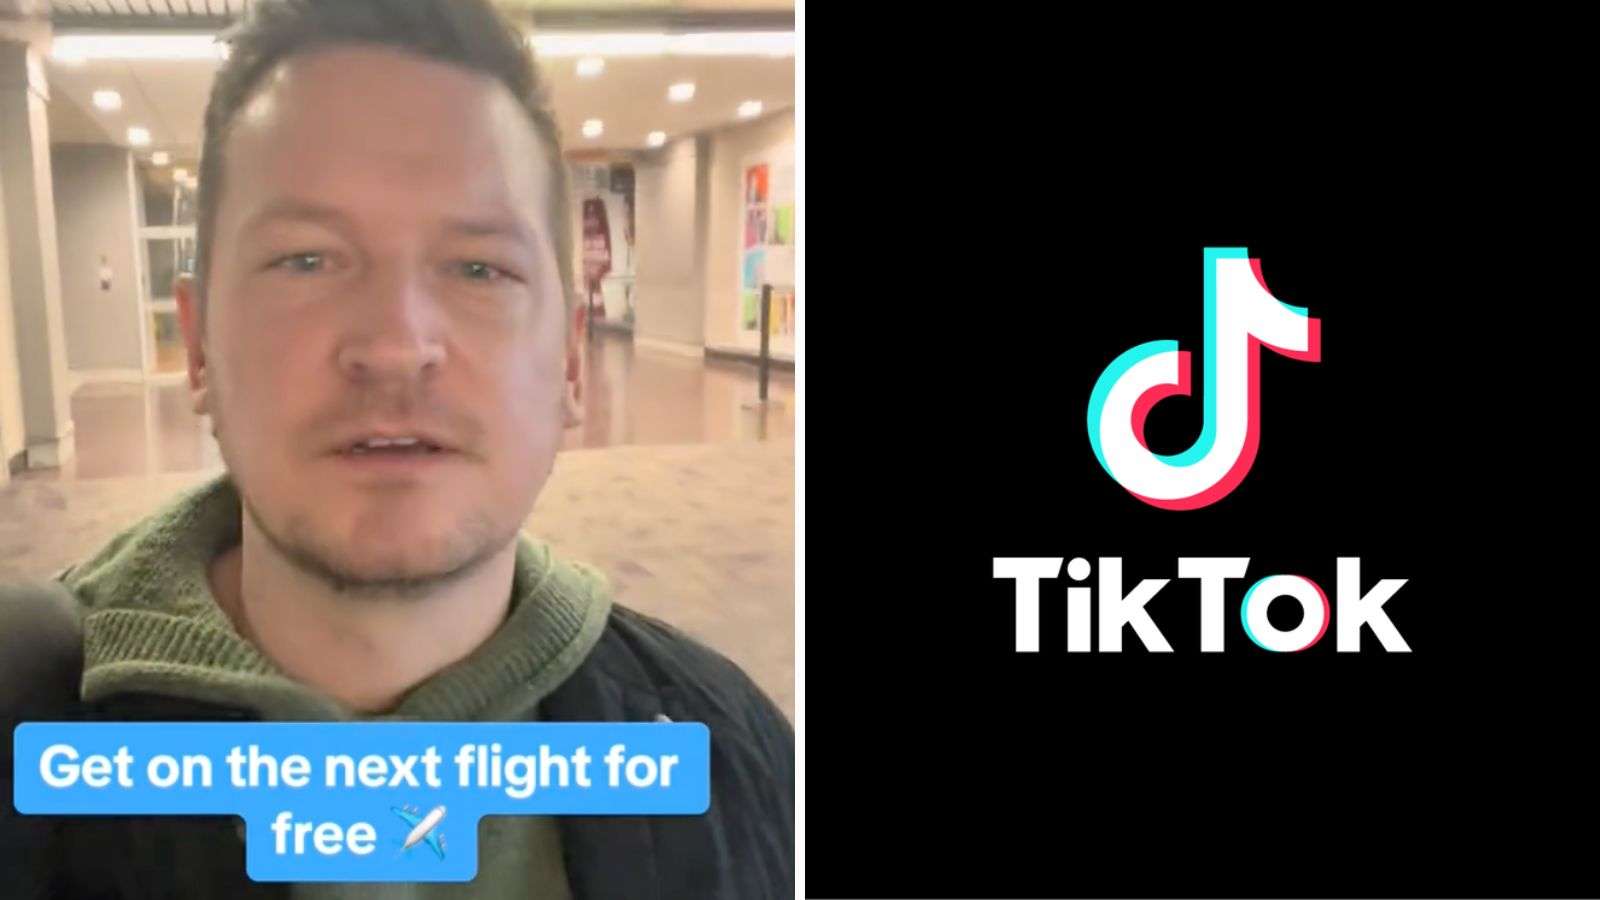 Traveler reveals how you can get flight for free if you miss yours